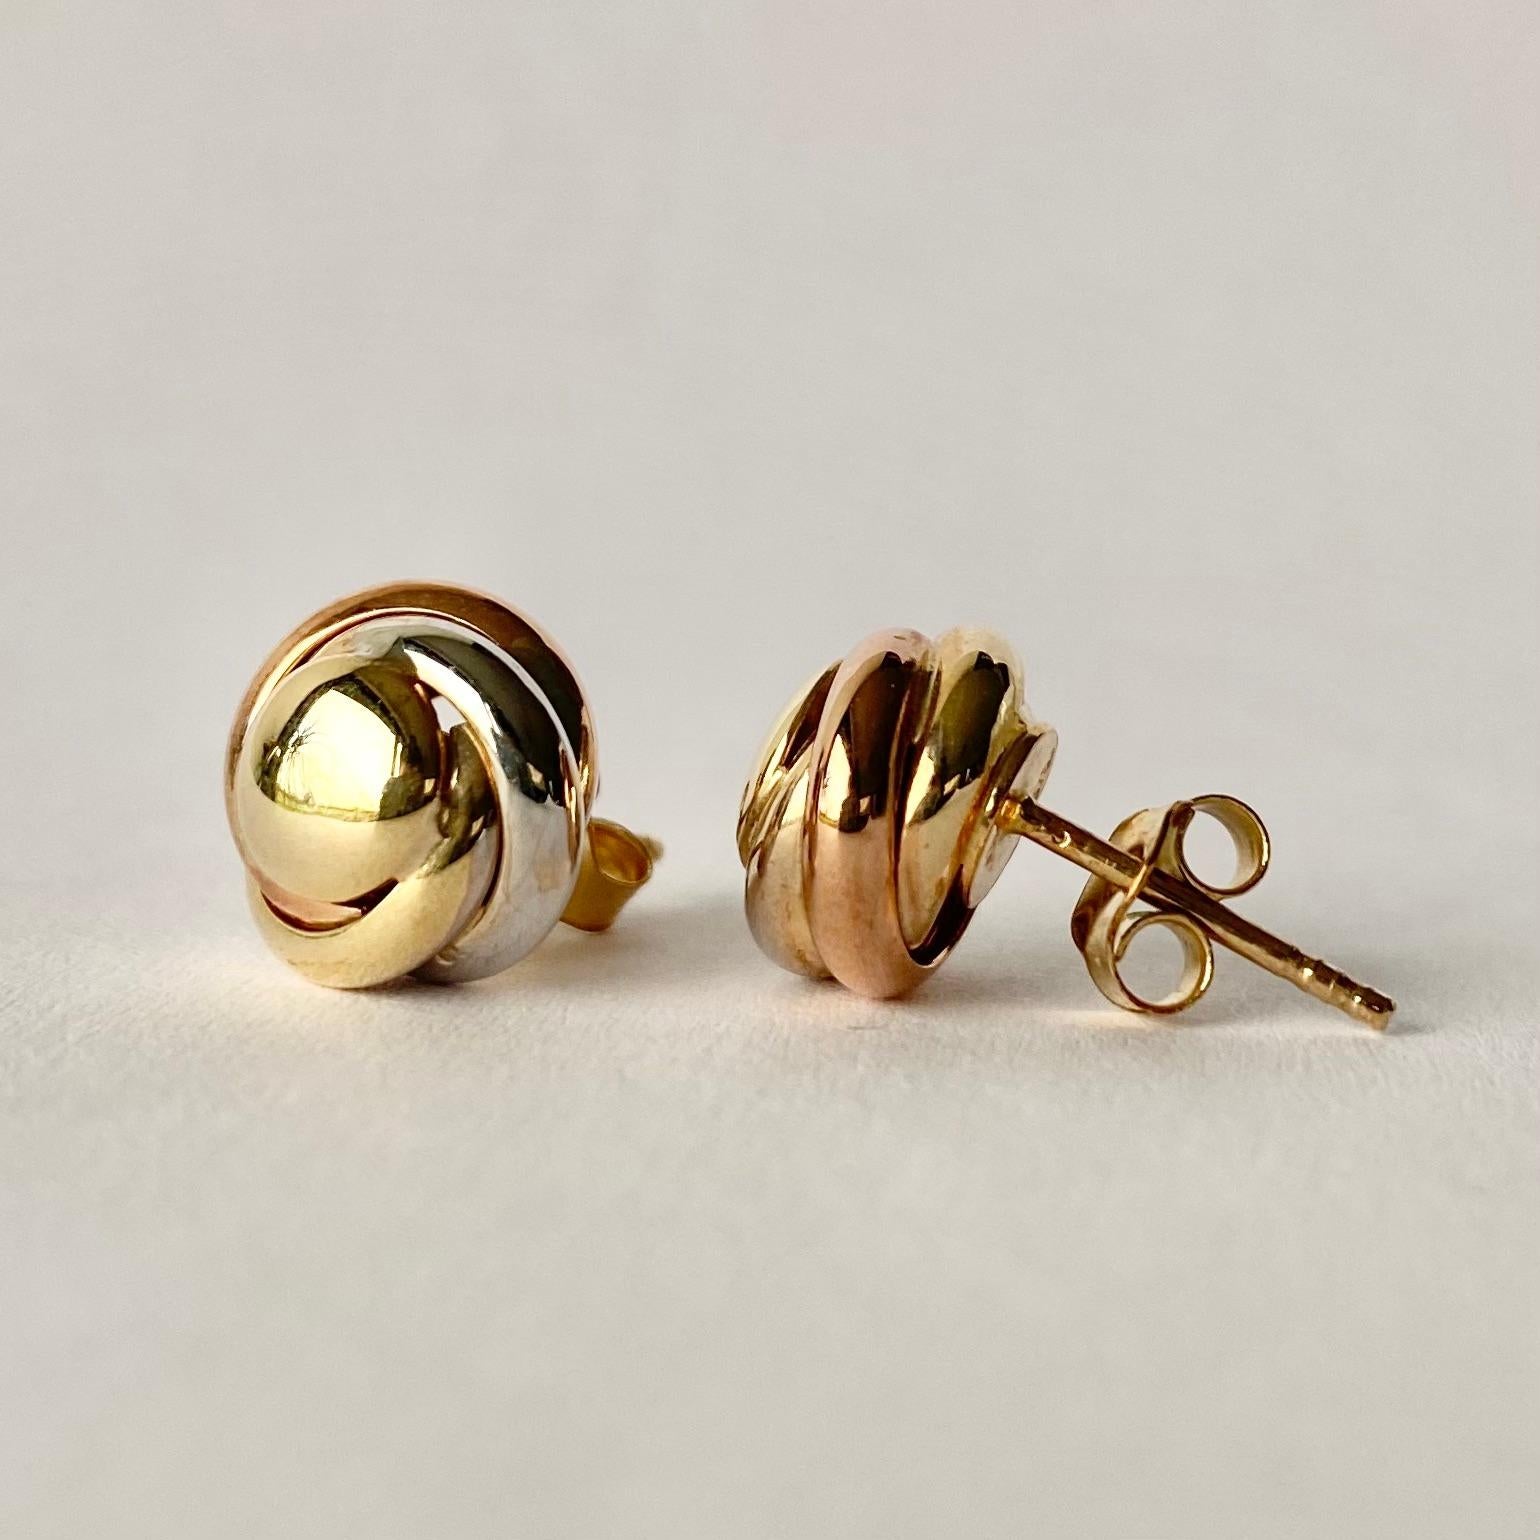 Glossy 9ct yellow gold superbly tied in a knot make the most stylish design for these earrings. They also feature a glossy gold ball at the centre. 

Knot Diameter: 10mm

Weight: 1.91g